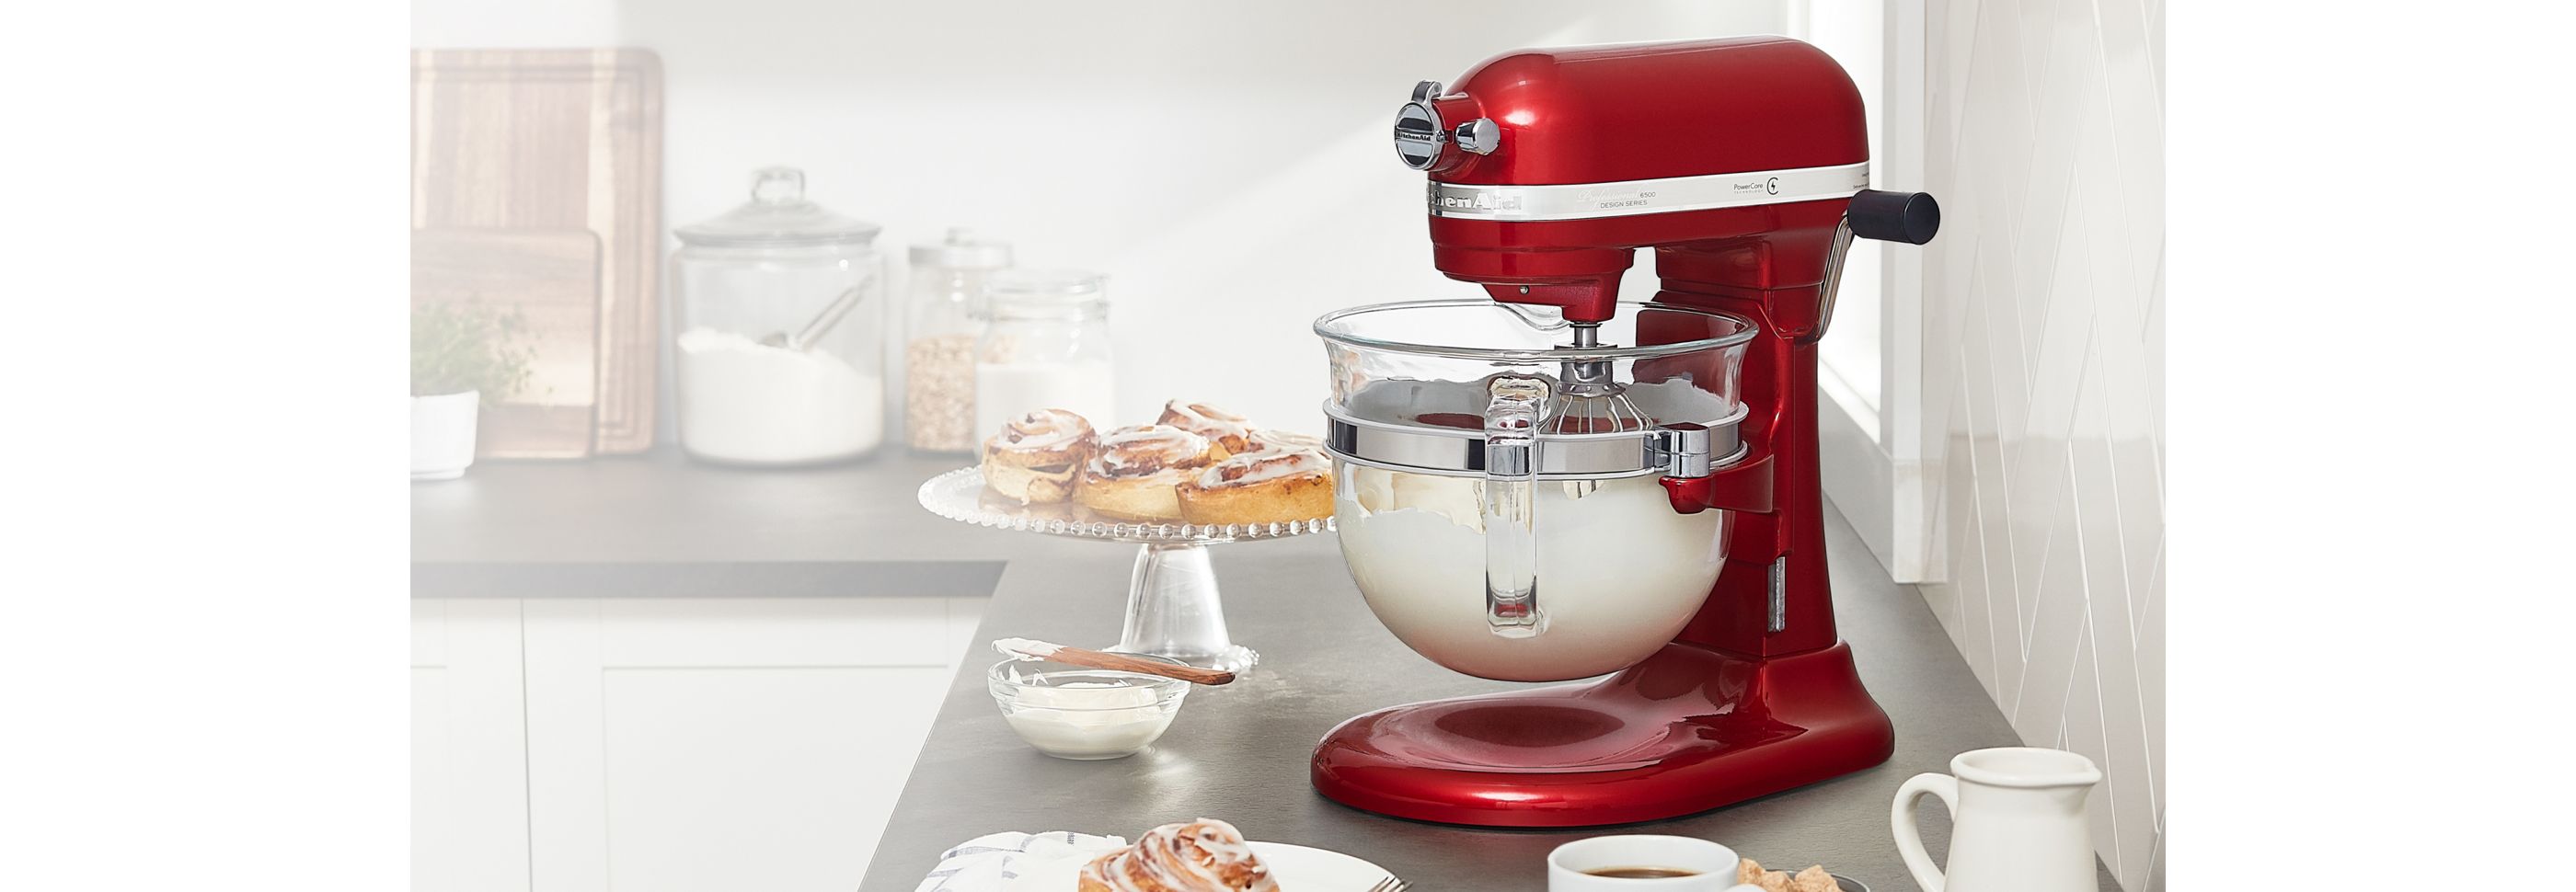 The Latest Addition to The Iconic KitchenAid Stand Mixer Range